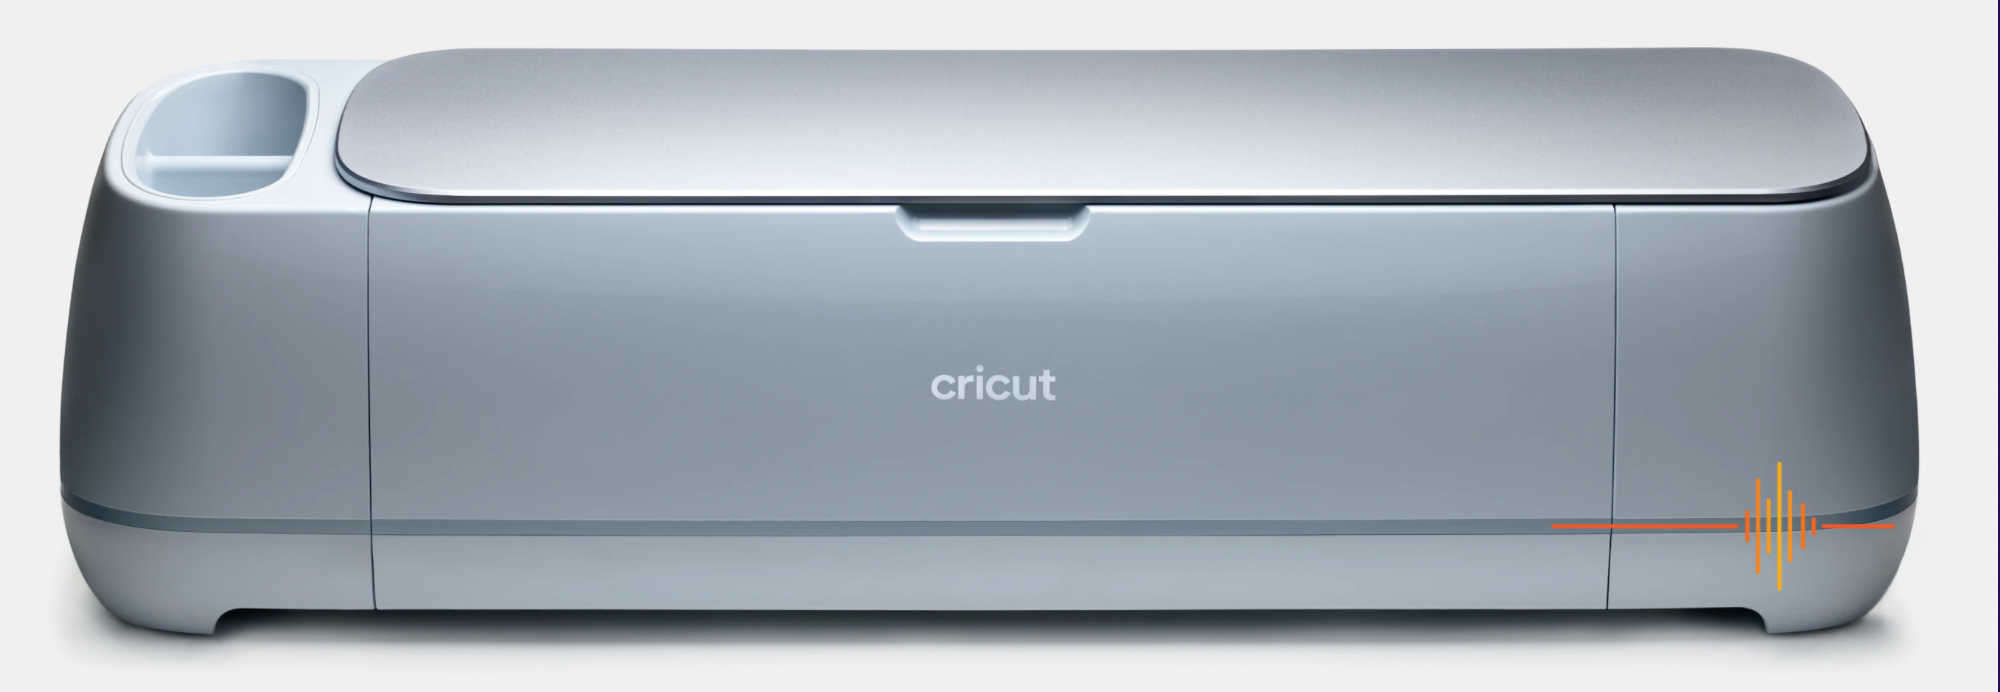 Cricut Maker 3 Review  Is it worth it? A Guide to read before buying –  Daydream Into Reality